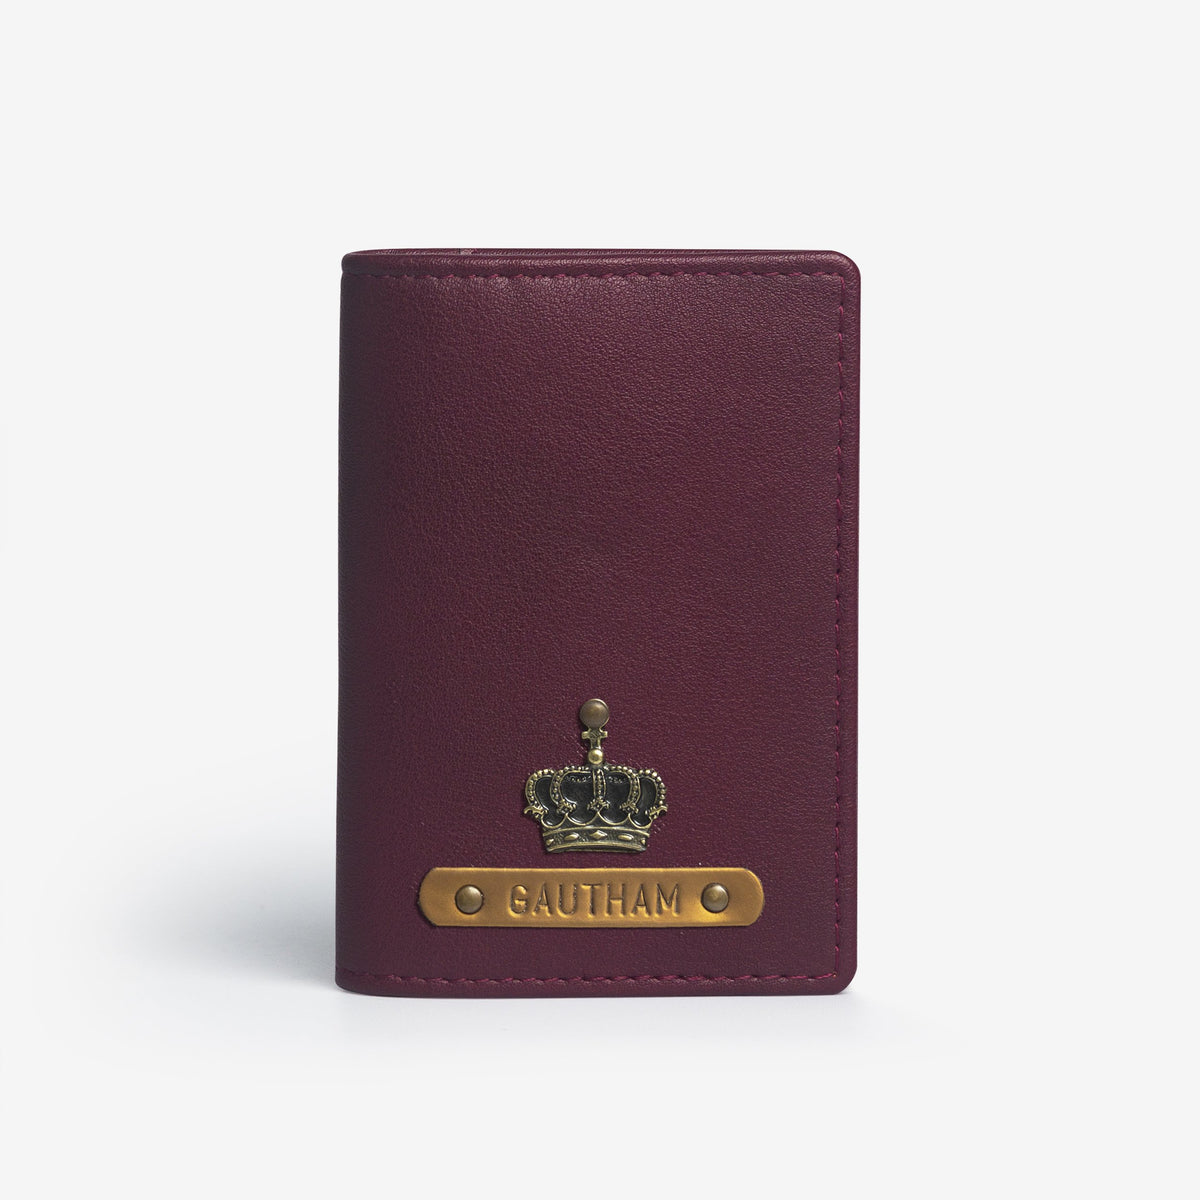 Personalised Card Holder Wallet - Wine with charm by The Messy Corner